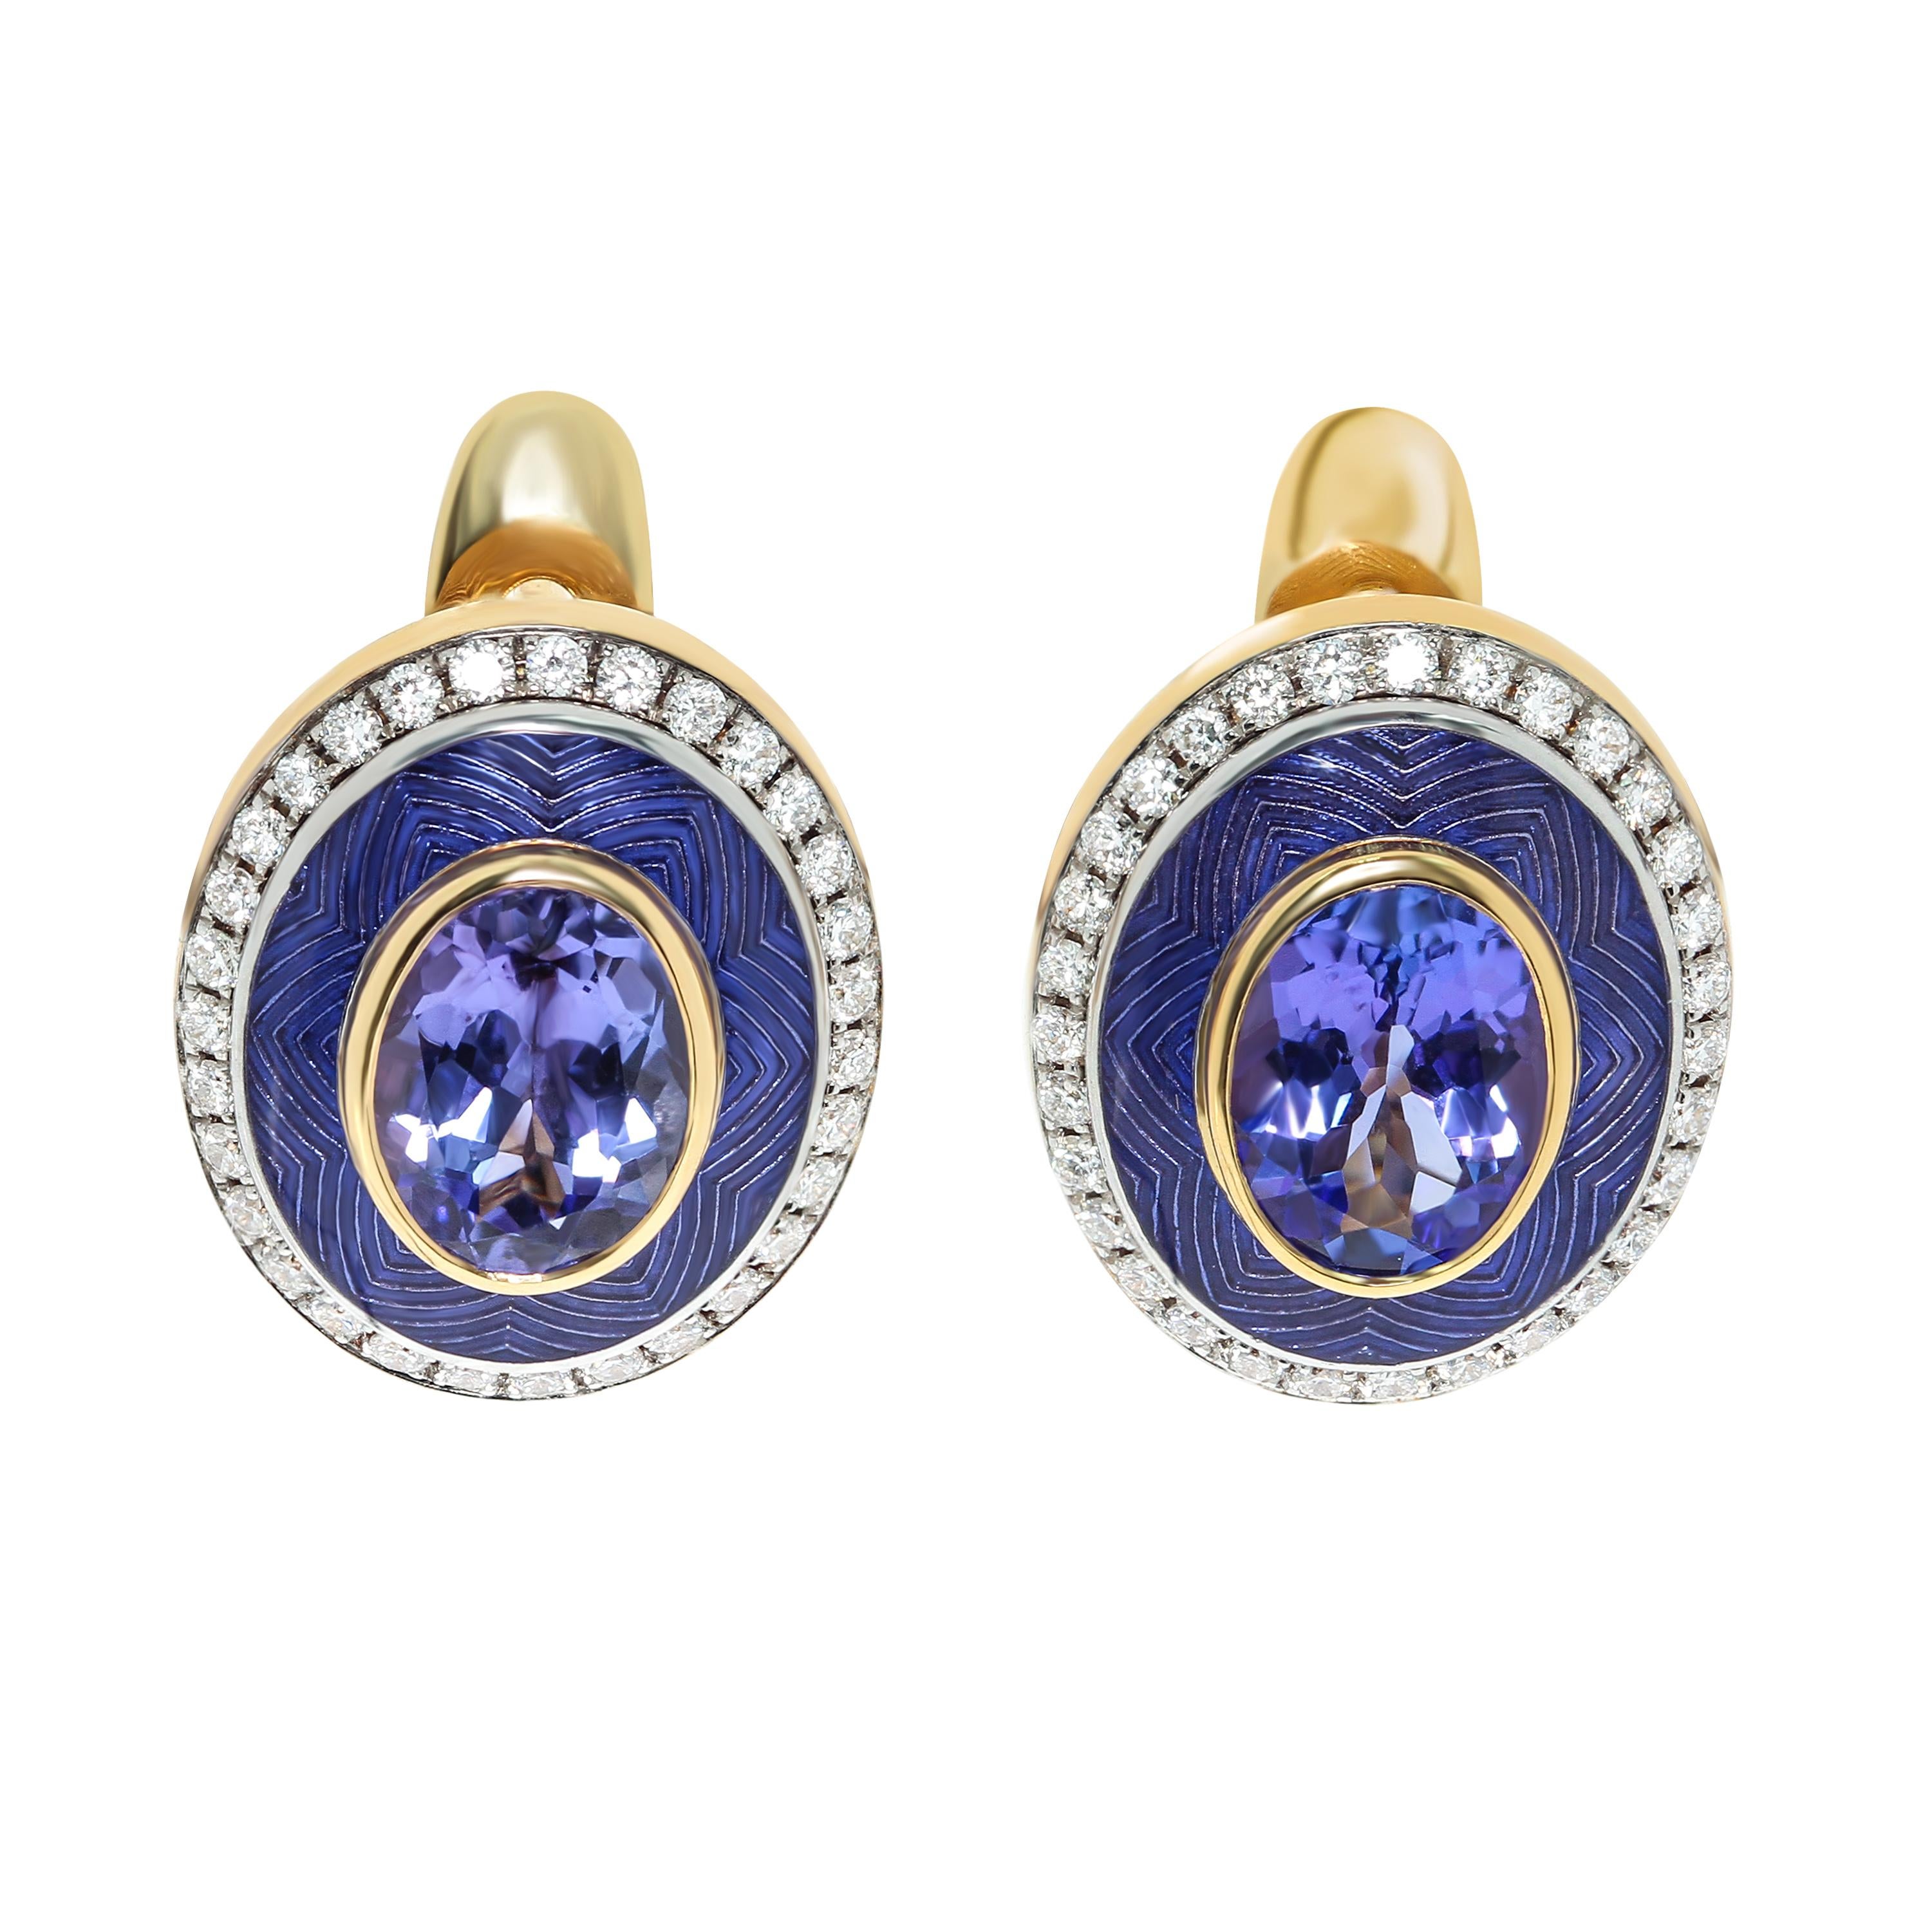 Tanzanite 2.43 Carat Diamonds Enamel 18 Karat Yellow Gold Tweed Earrings
Perhaps this is the brightest and most popular representative of the Pret-a-Porter collection. The texture of Tweed reminds of the well-known fabric, but most importantly, it